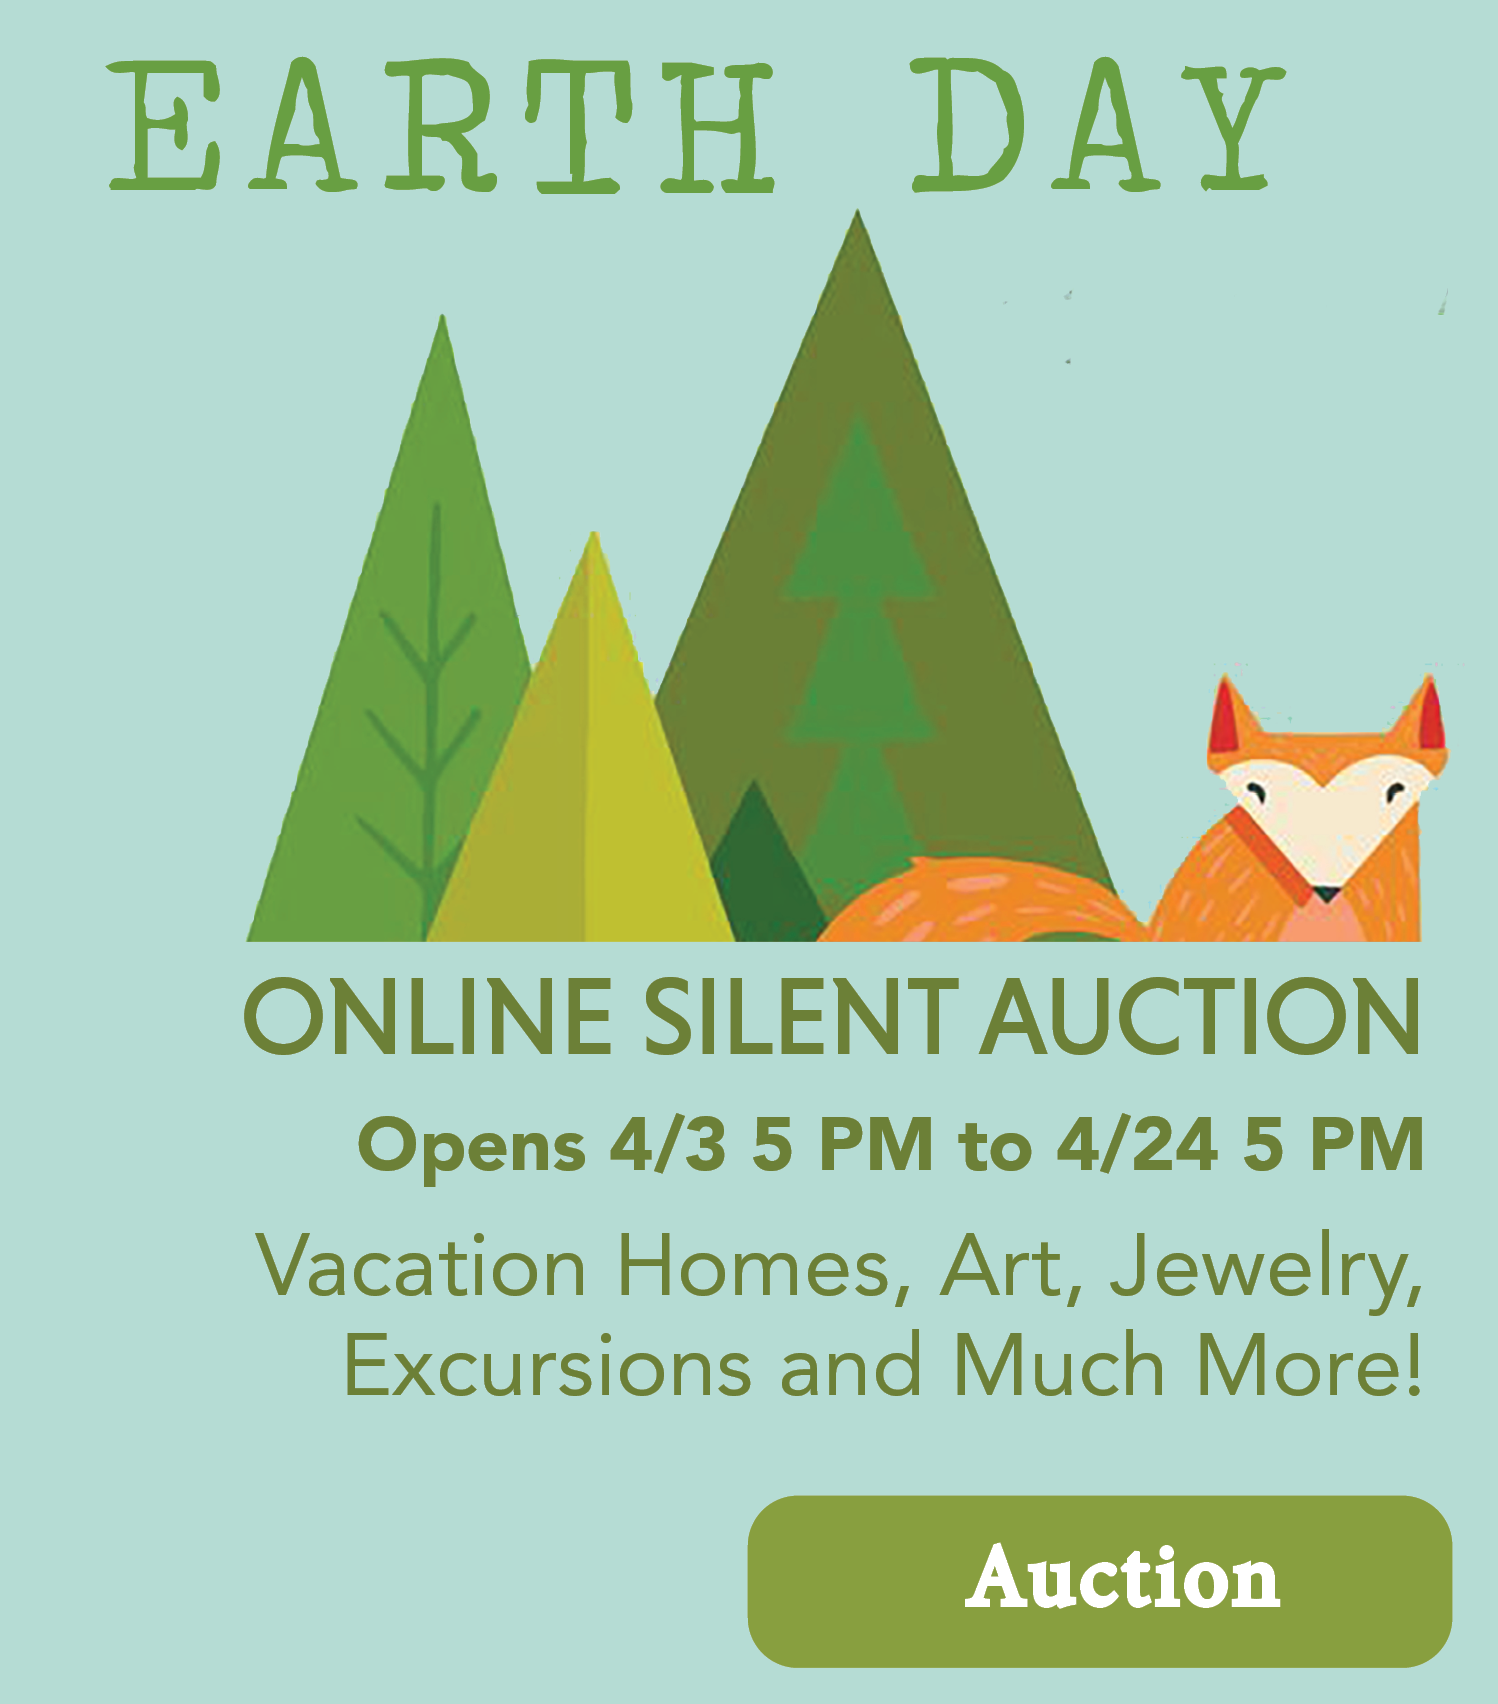 Earth Day Silent Auction